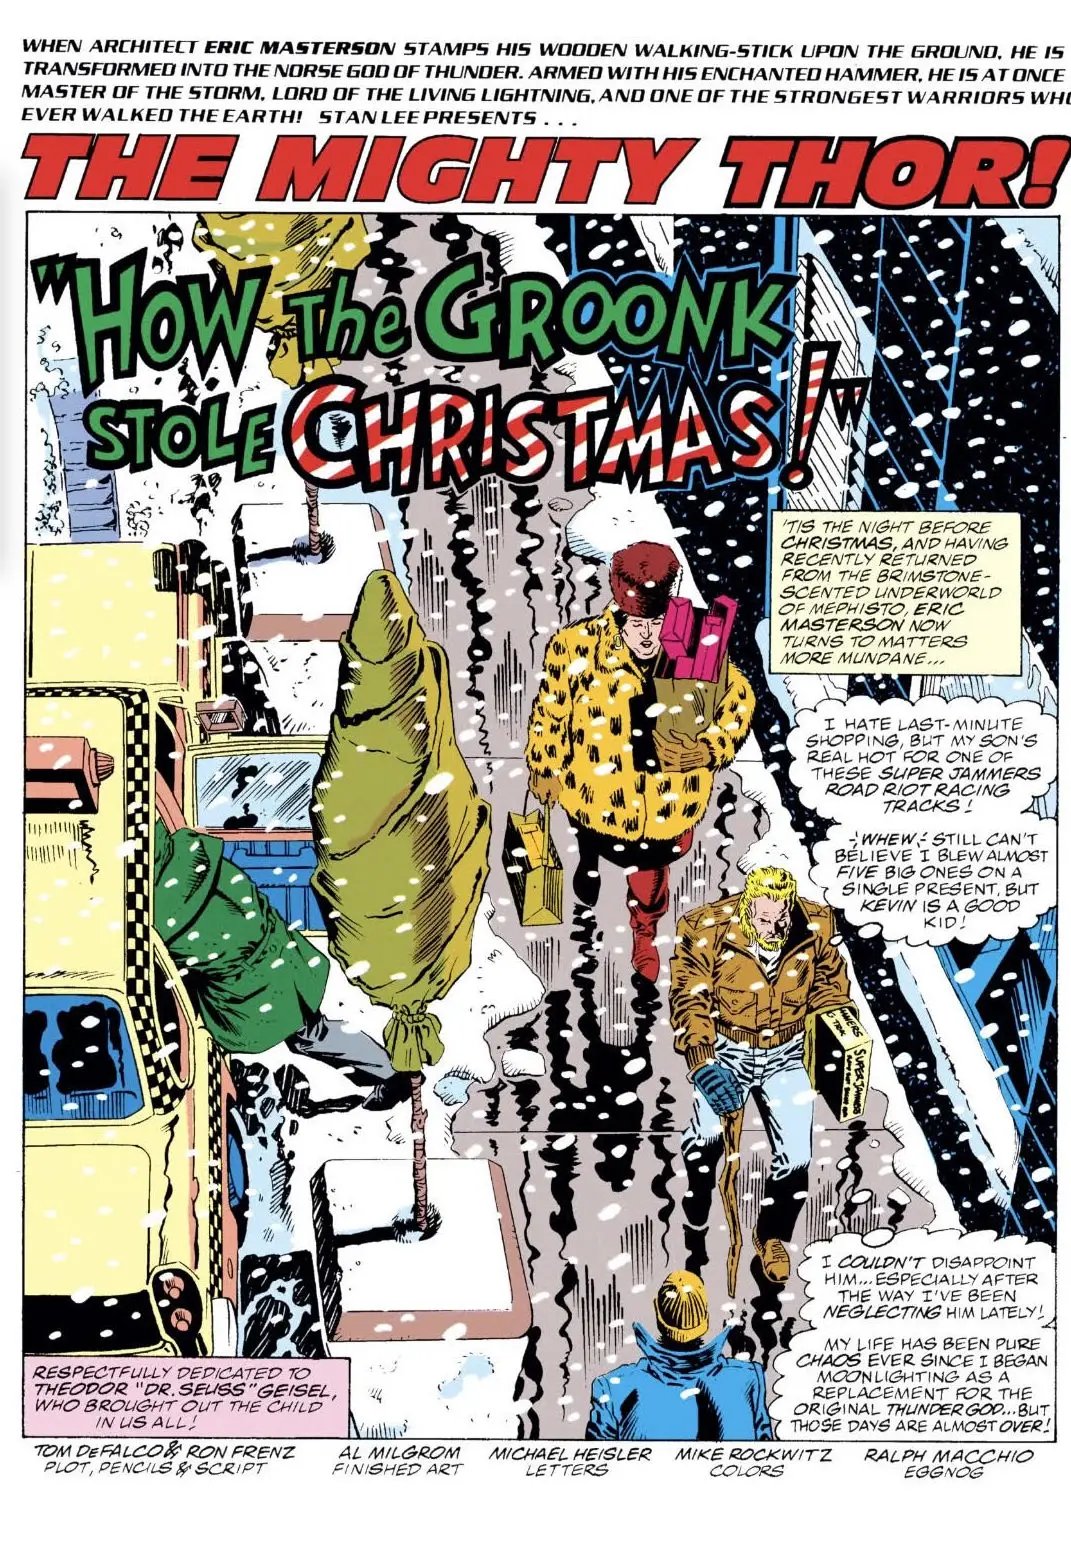 How the grinch stole Christmas Thor